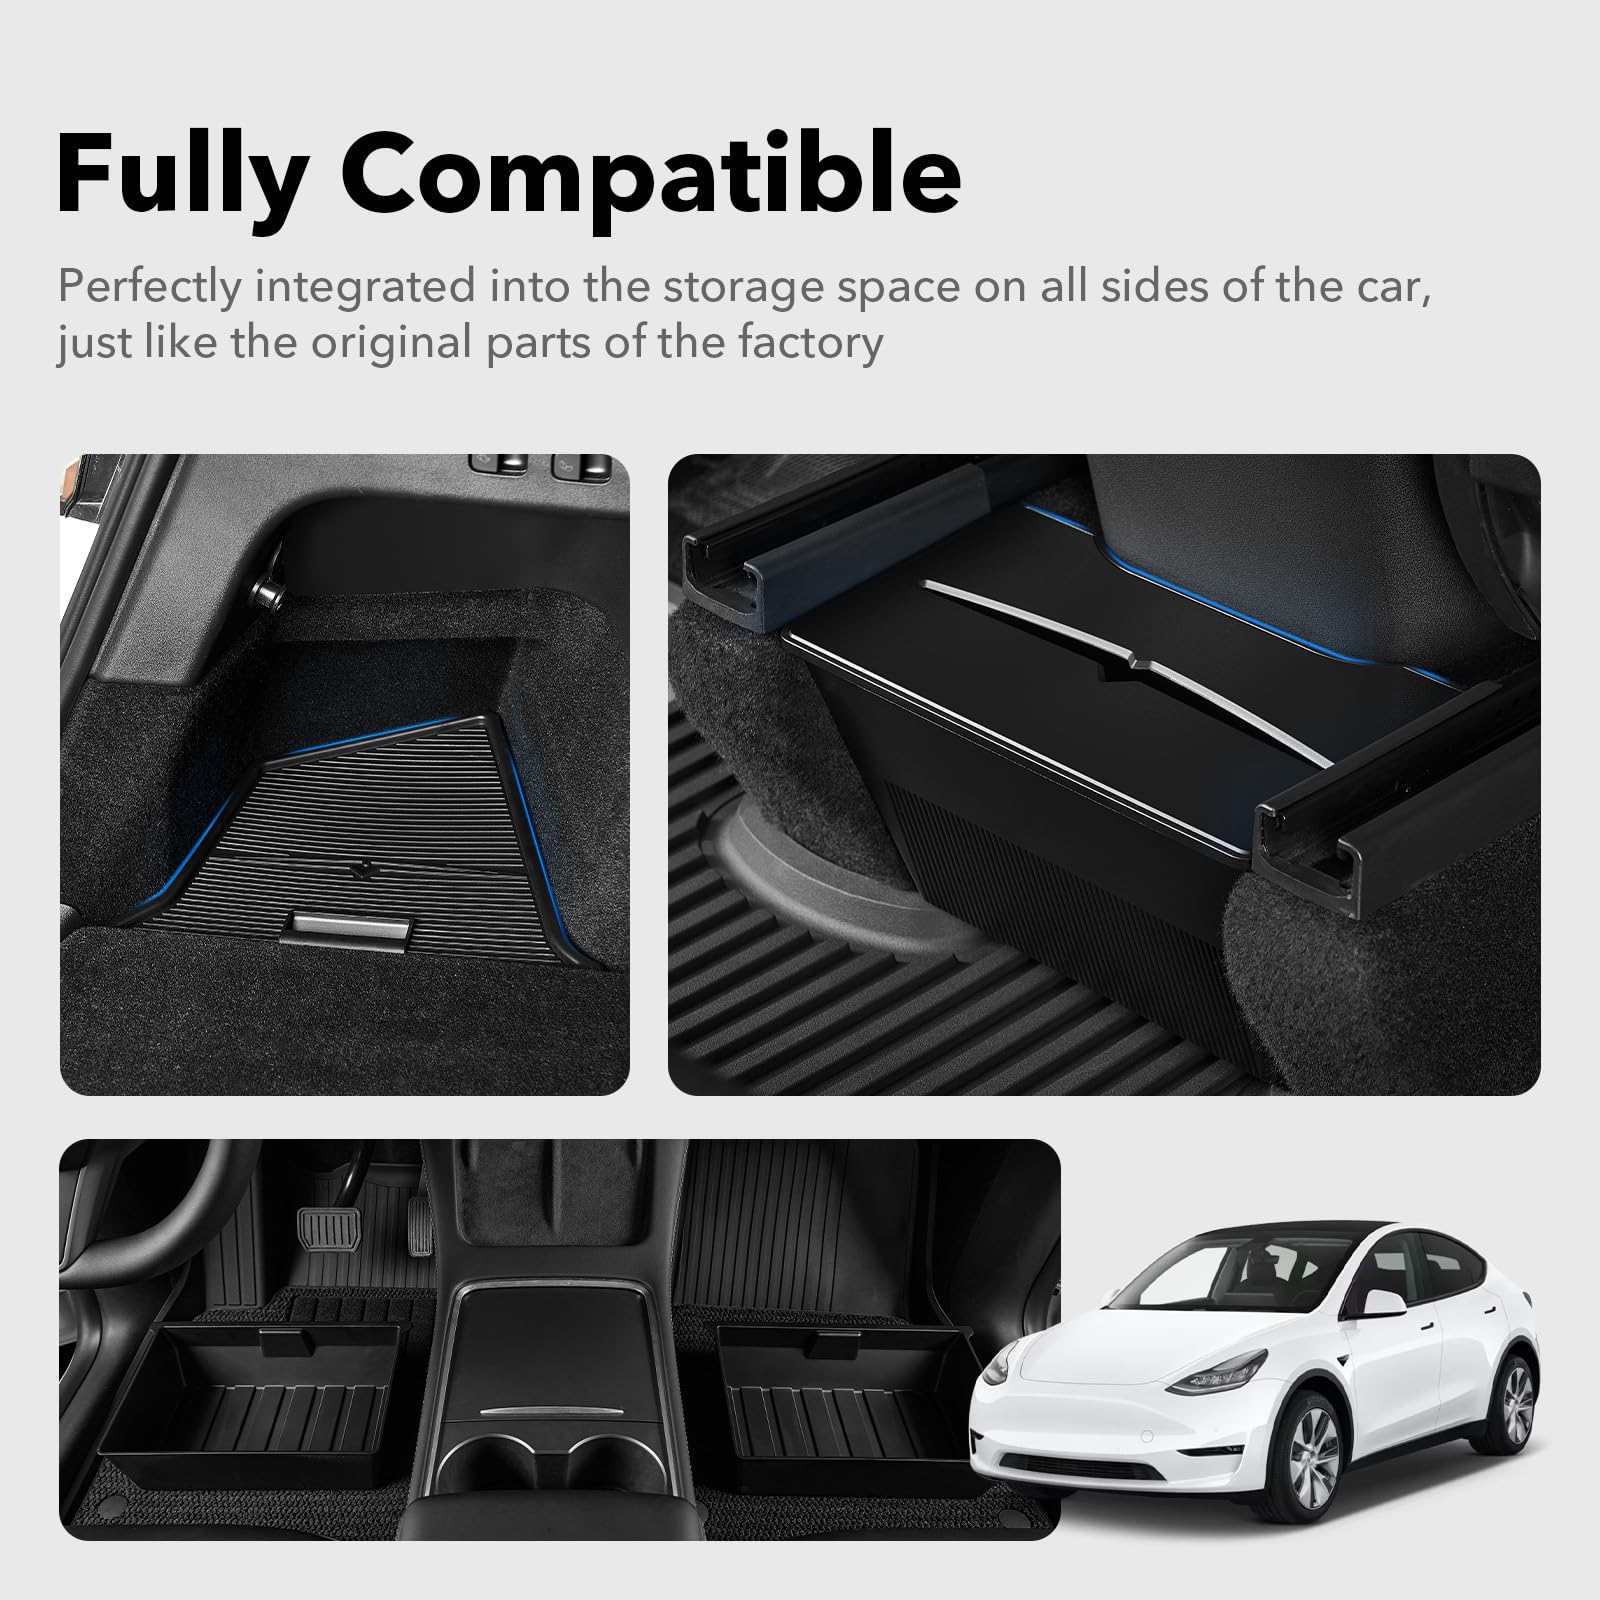 3W Tesla Model Y Accessories-Complete Storage Solution Kit (2020-2022) (2023-2024): Includes 2 Under Seat Storage Boxes, 2 Rear Trunk Organizers, and Rear Center Console Side Storage Box with Lids Vehicles & Parts 3Wliners   